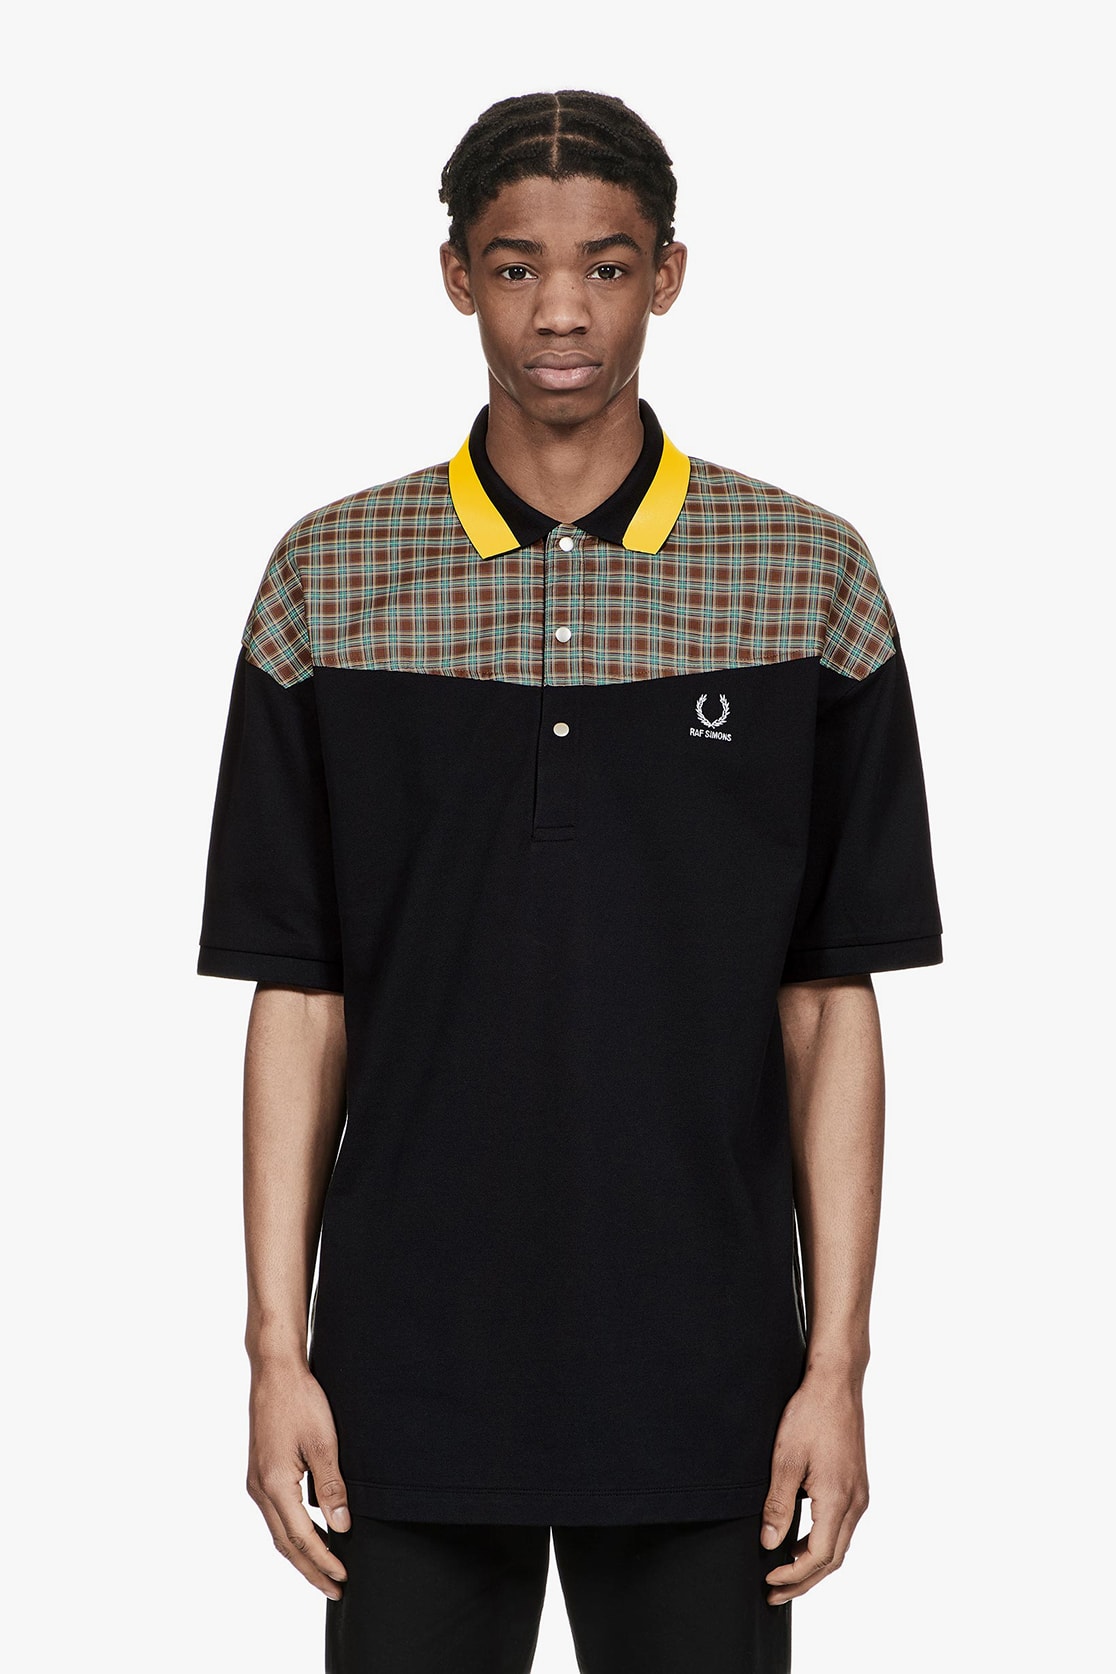 Fred Perry x Raf Simons Autumn 2018 Collection Fashion Clothing Cop Purchase Buy Collab Collaborations 10 years ten decade